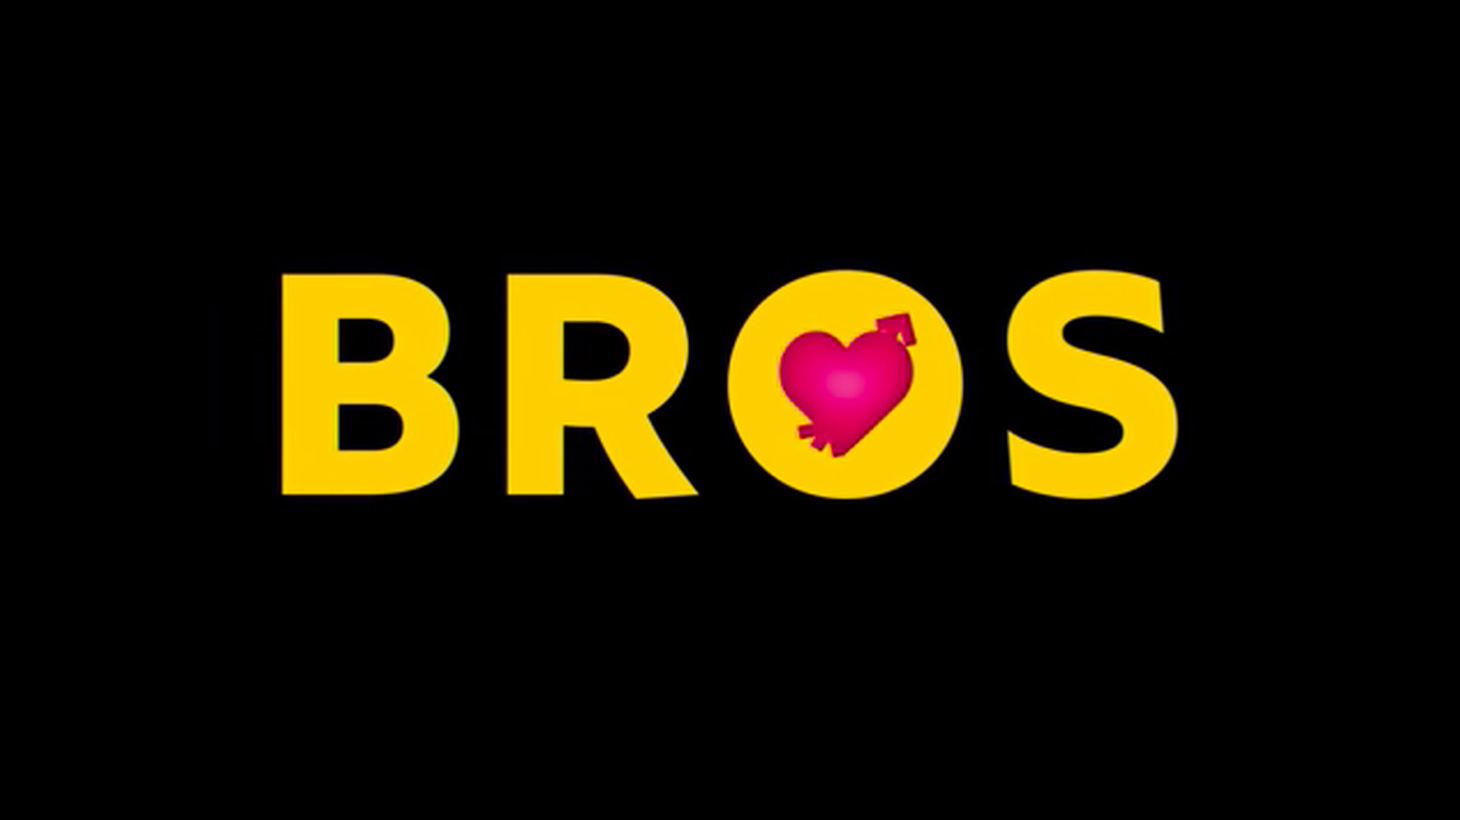 “Bros” features a LGBTQ+ main cast, including Billy Eichner, Luke Macfarlane, Monica Raymund, and Guillermo Díaz.